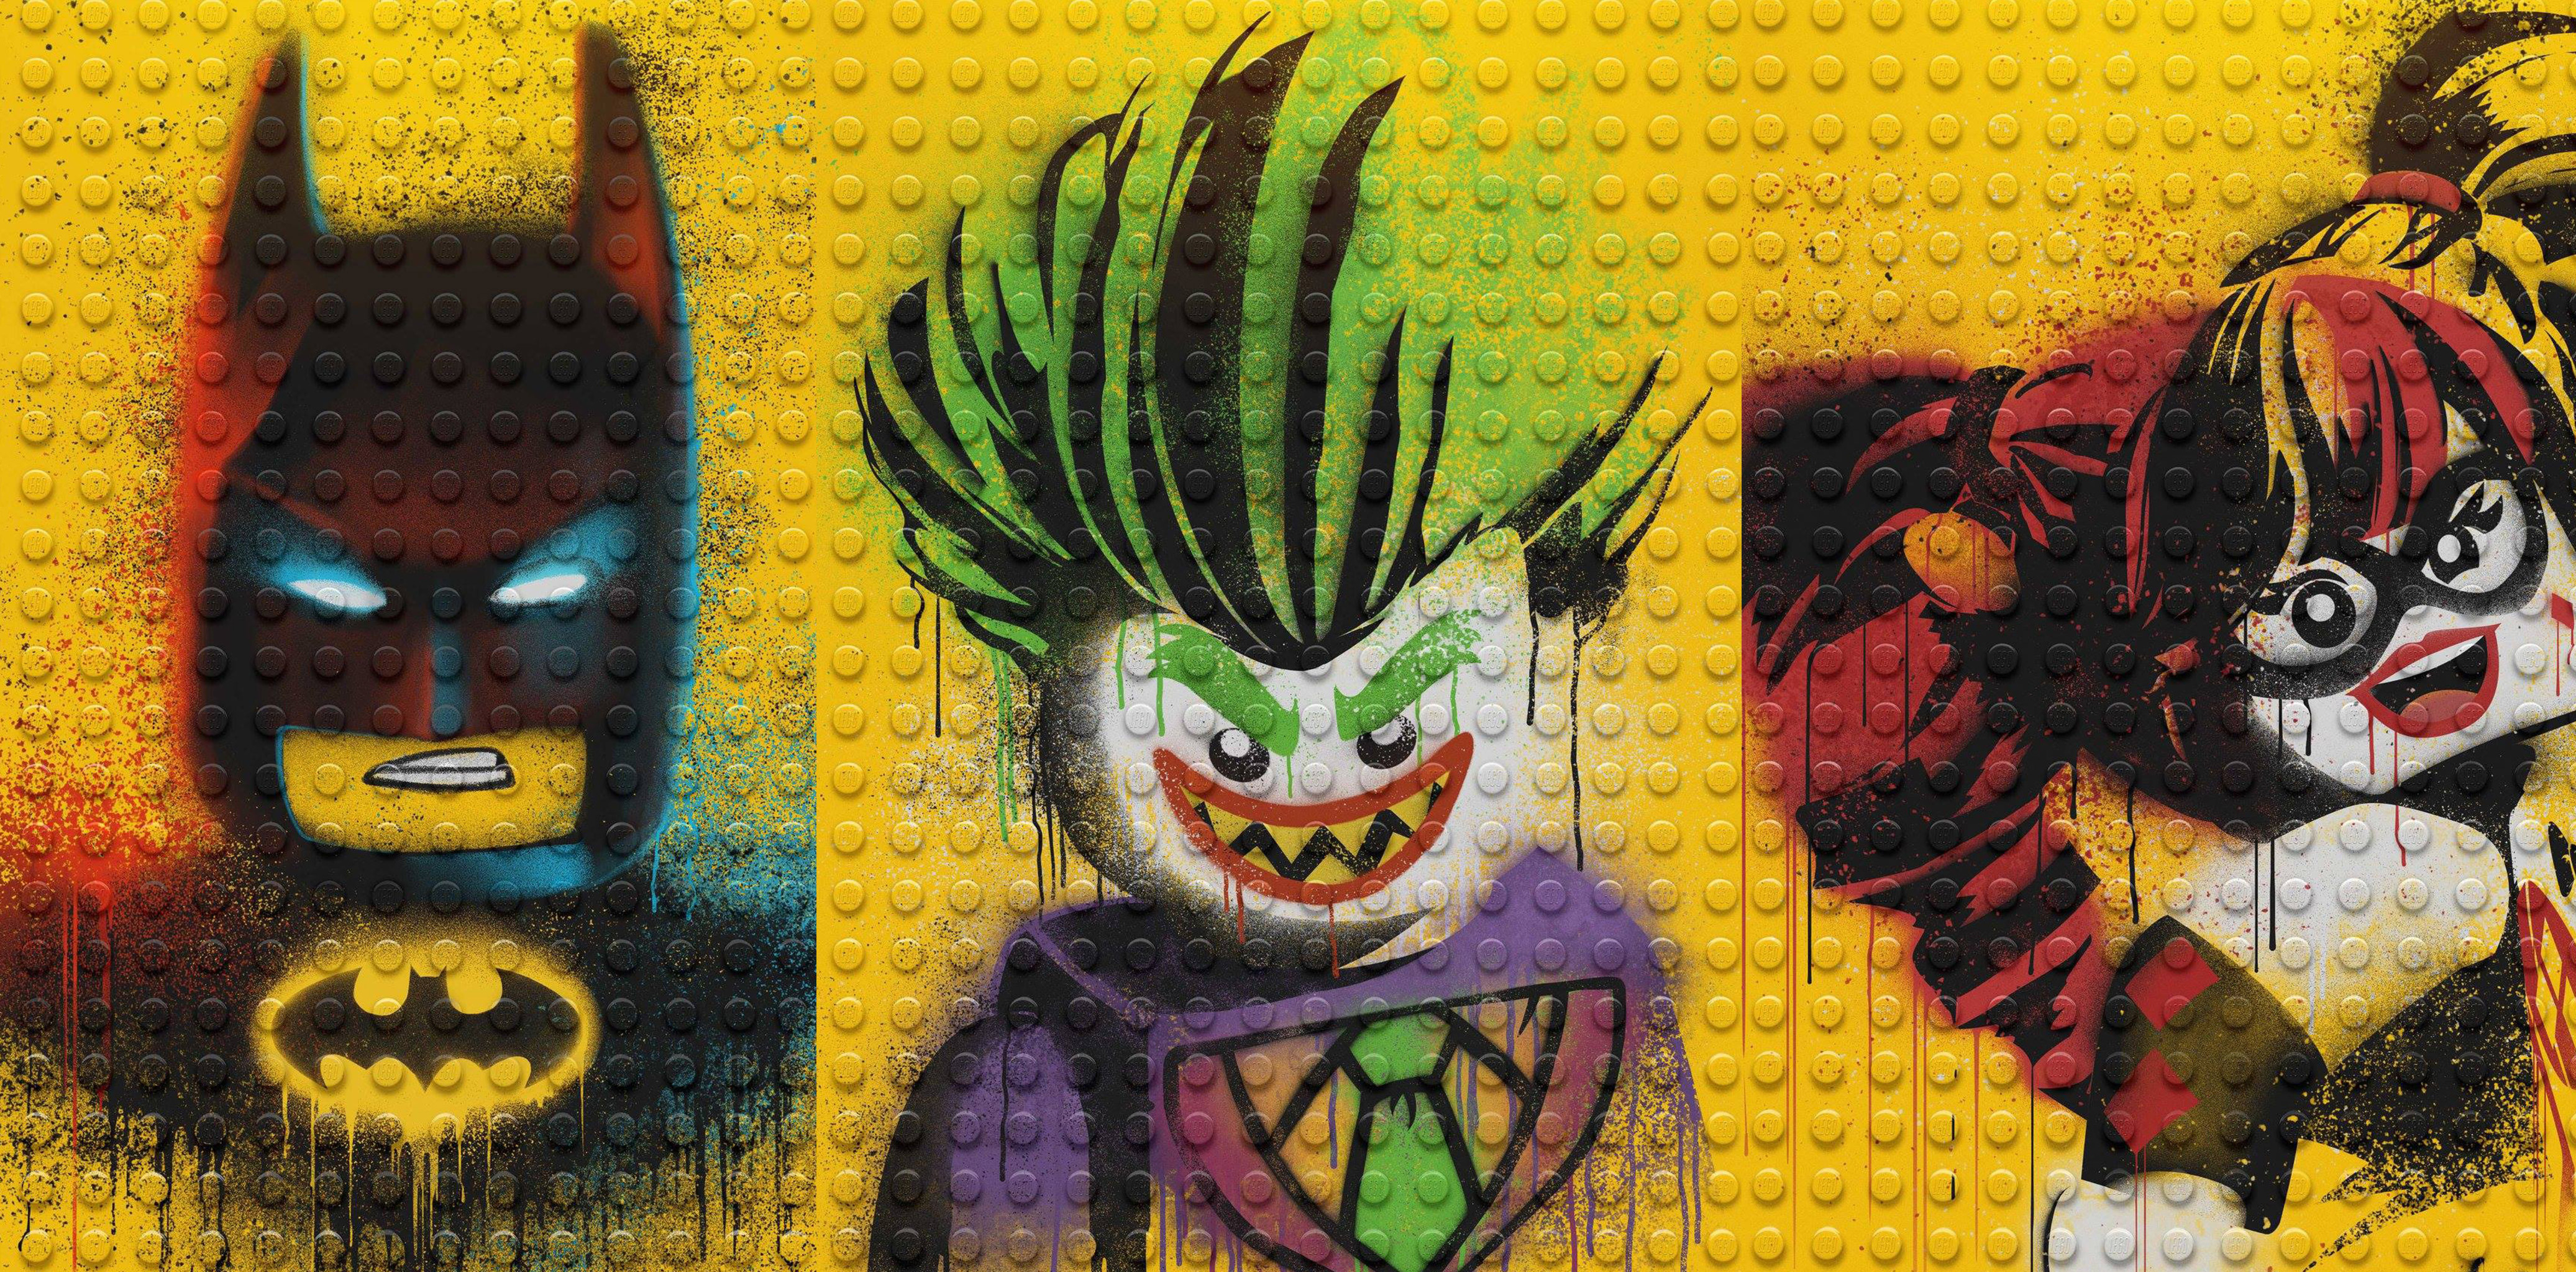 the-lego-batman-harley-quinn-and-joker-wallpaper-hd-movies-wallpapers-4k-wallpapers-images